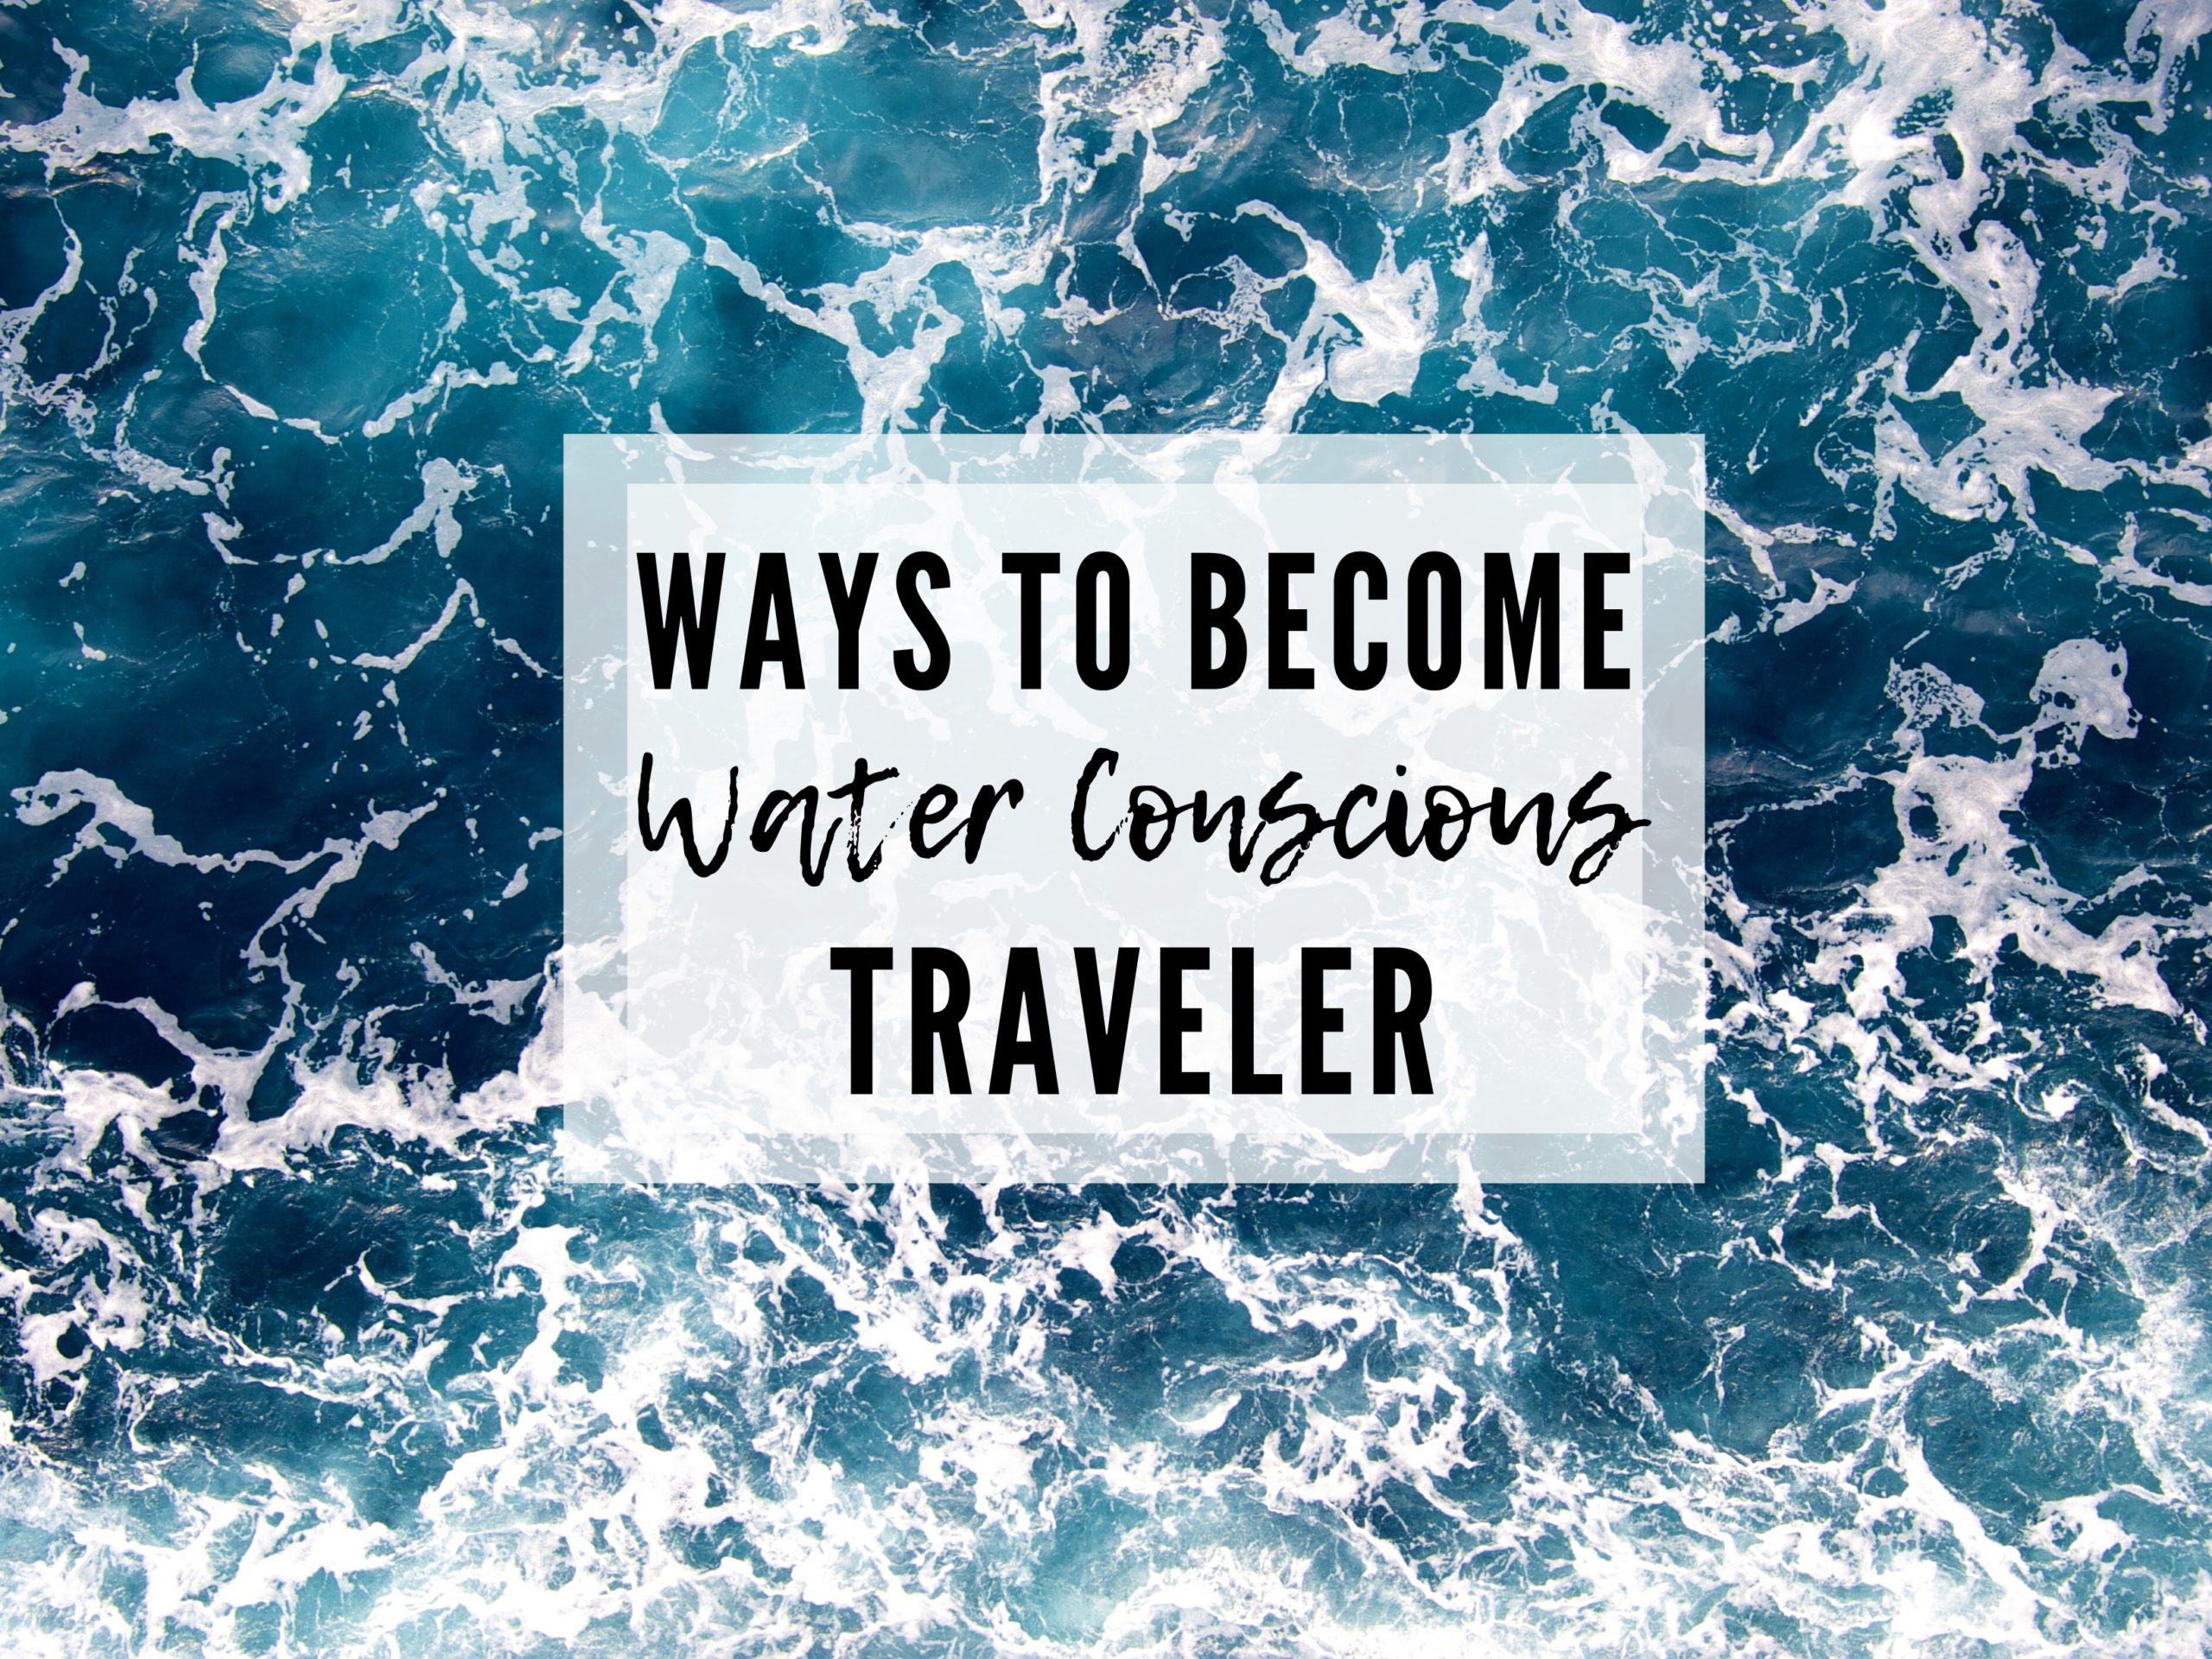 EASY STEPS YOU CAN TAKE TO BECOME A MORE WATER CONSCIOUS TRAVELER